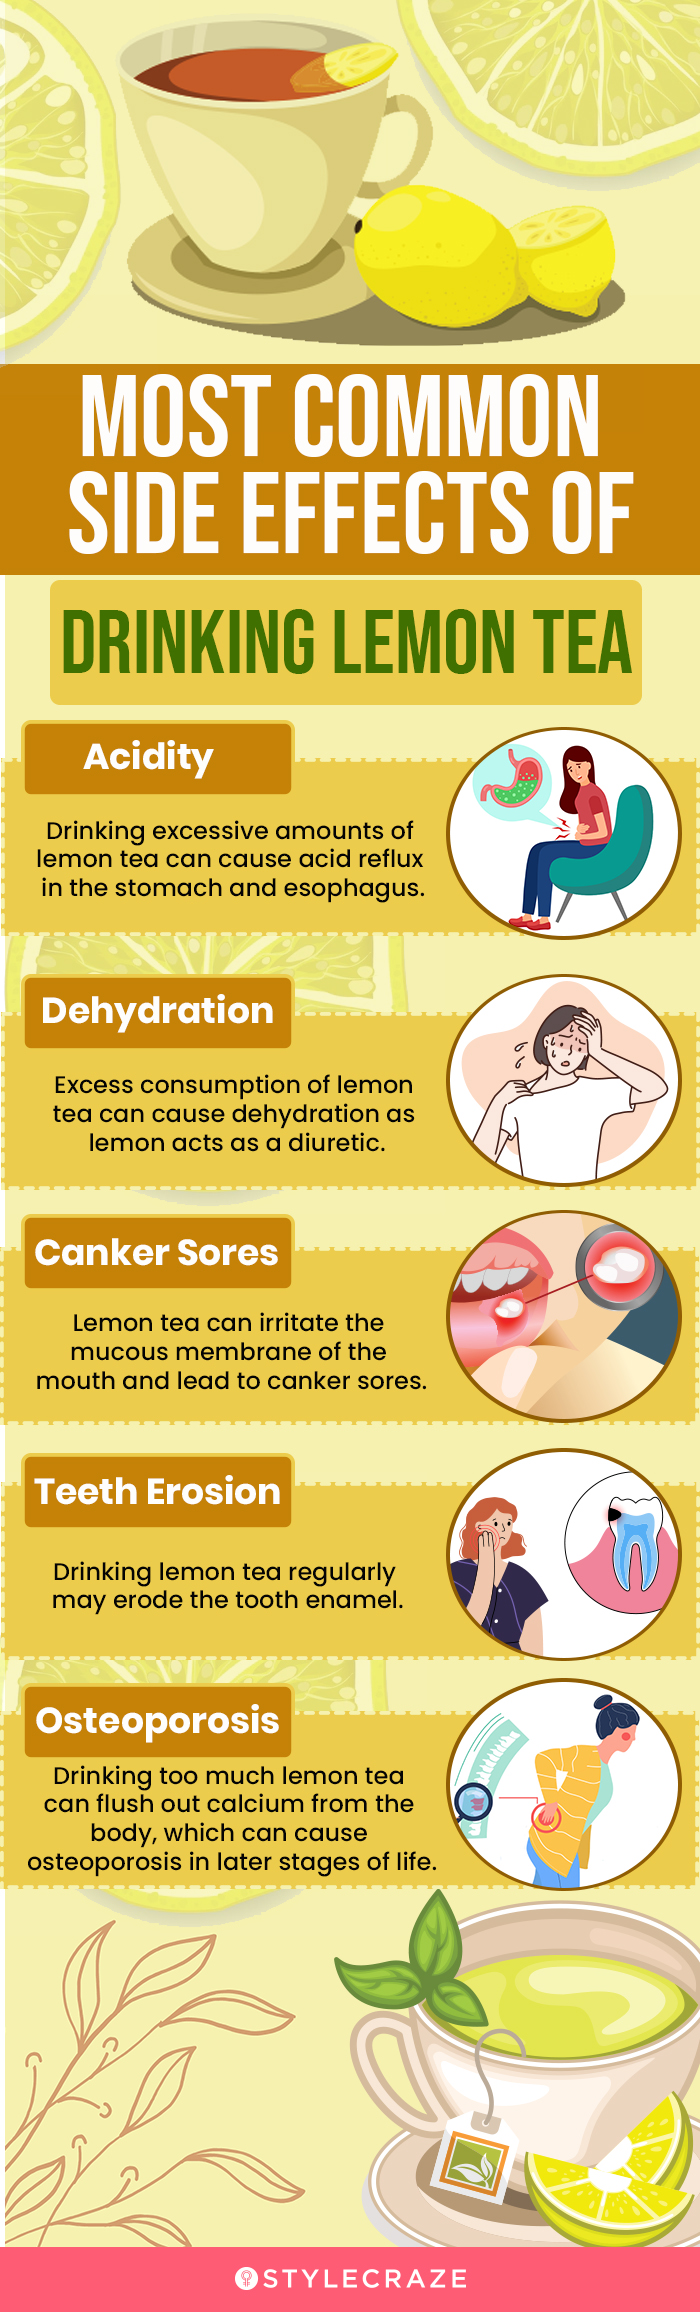 most common side effects of drinking lemon tea (infographic)